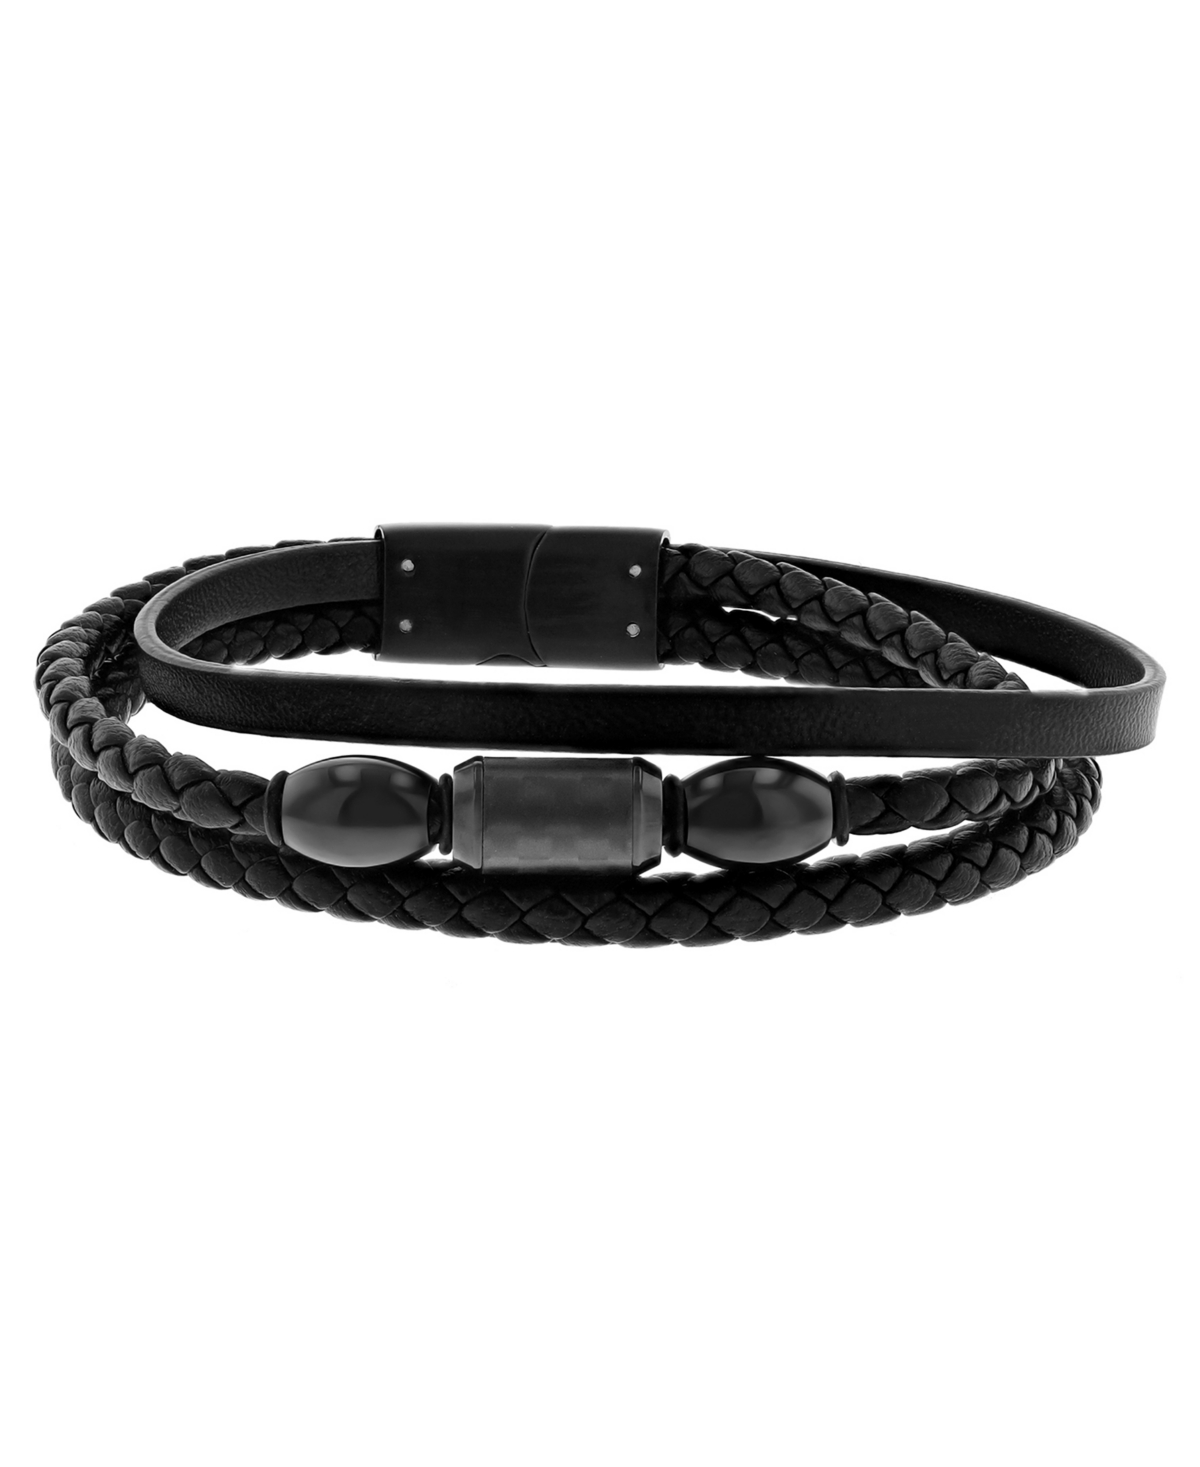 C & c Jewelry Macy's Men's Black Faux Leather Stacked Bracelet with Stainless Steel Accents